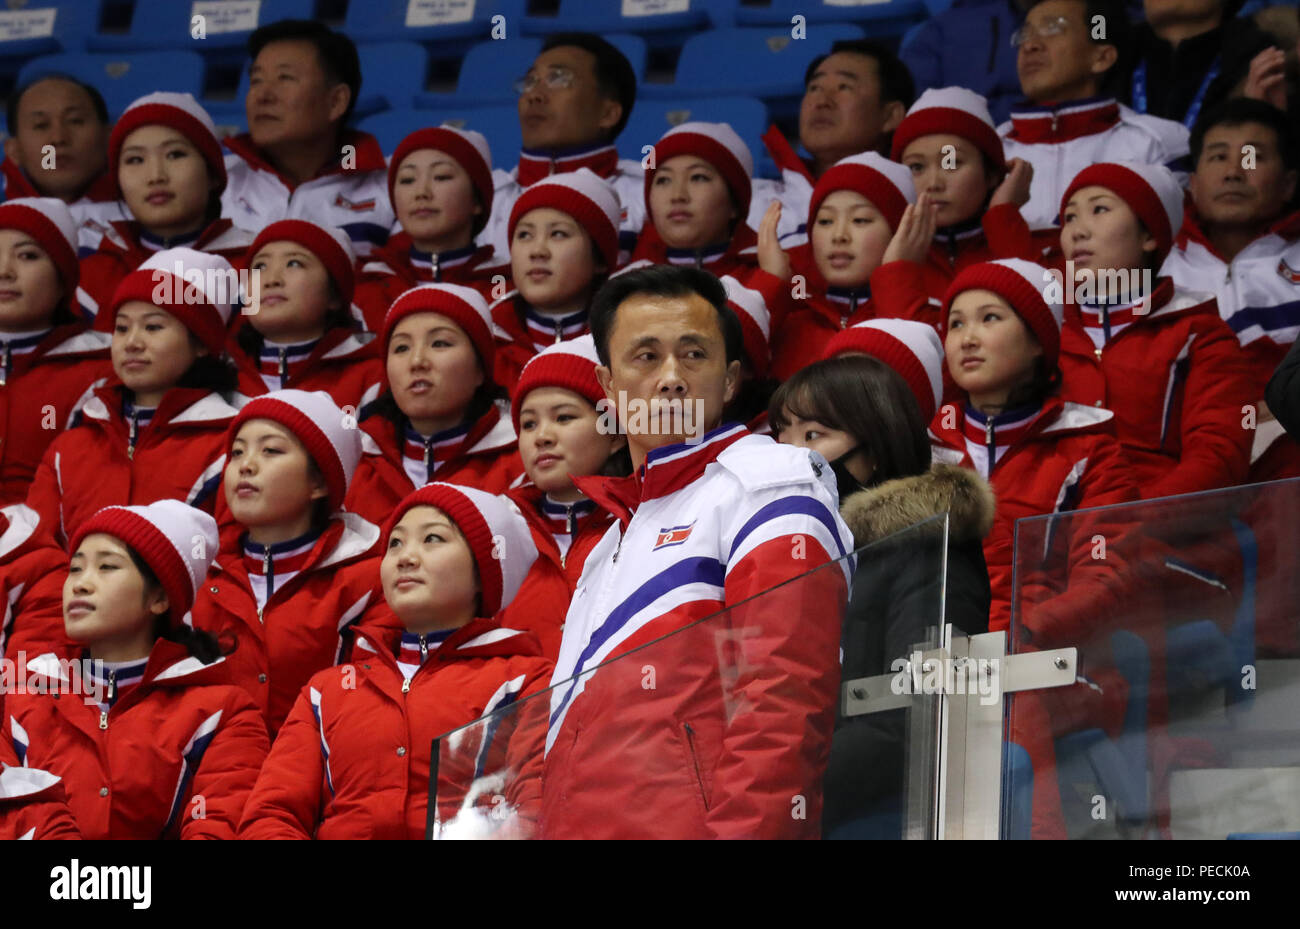 North Korea's cheering squad perform during Pair Skating Free Skating in Gangneung Ice Arena at the 2018 Winter Olympics Stock Photo